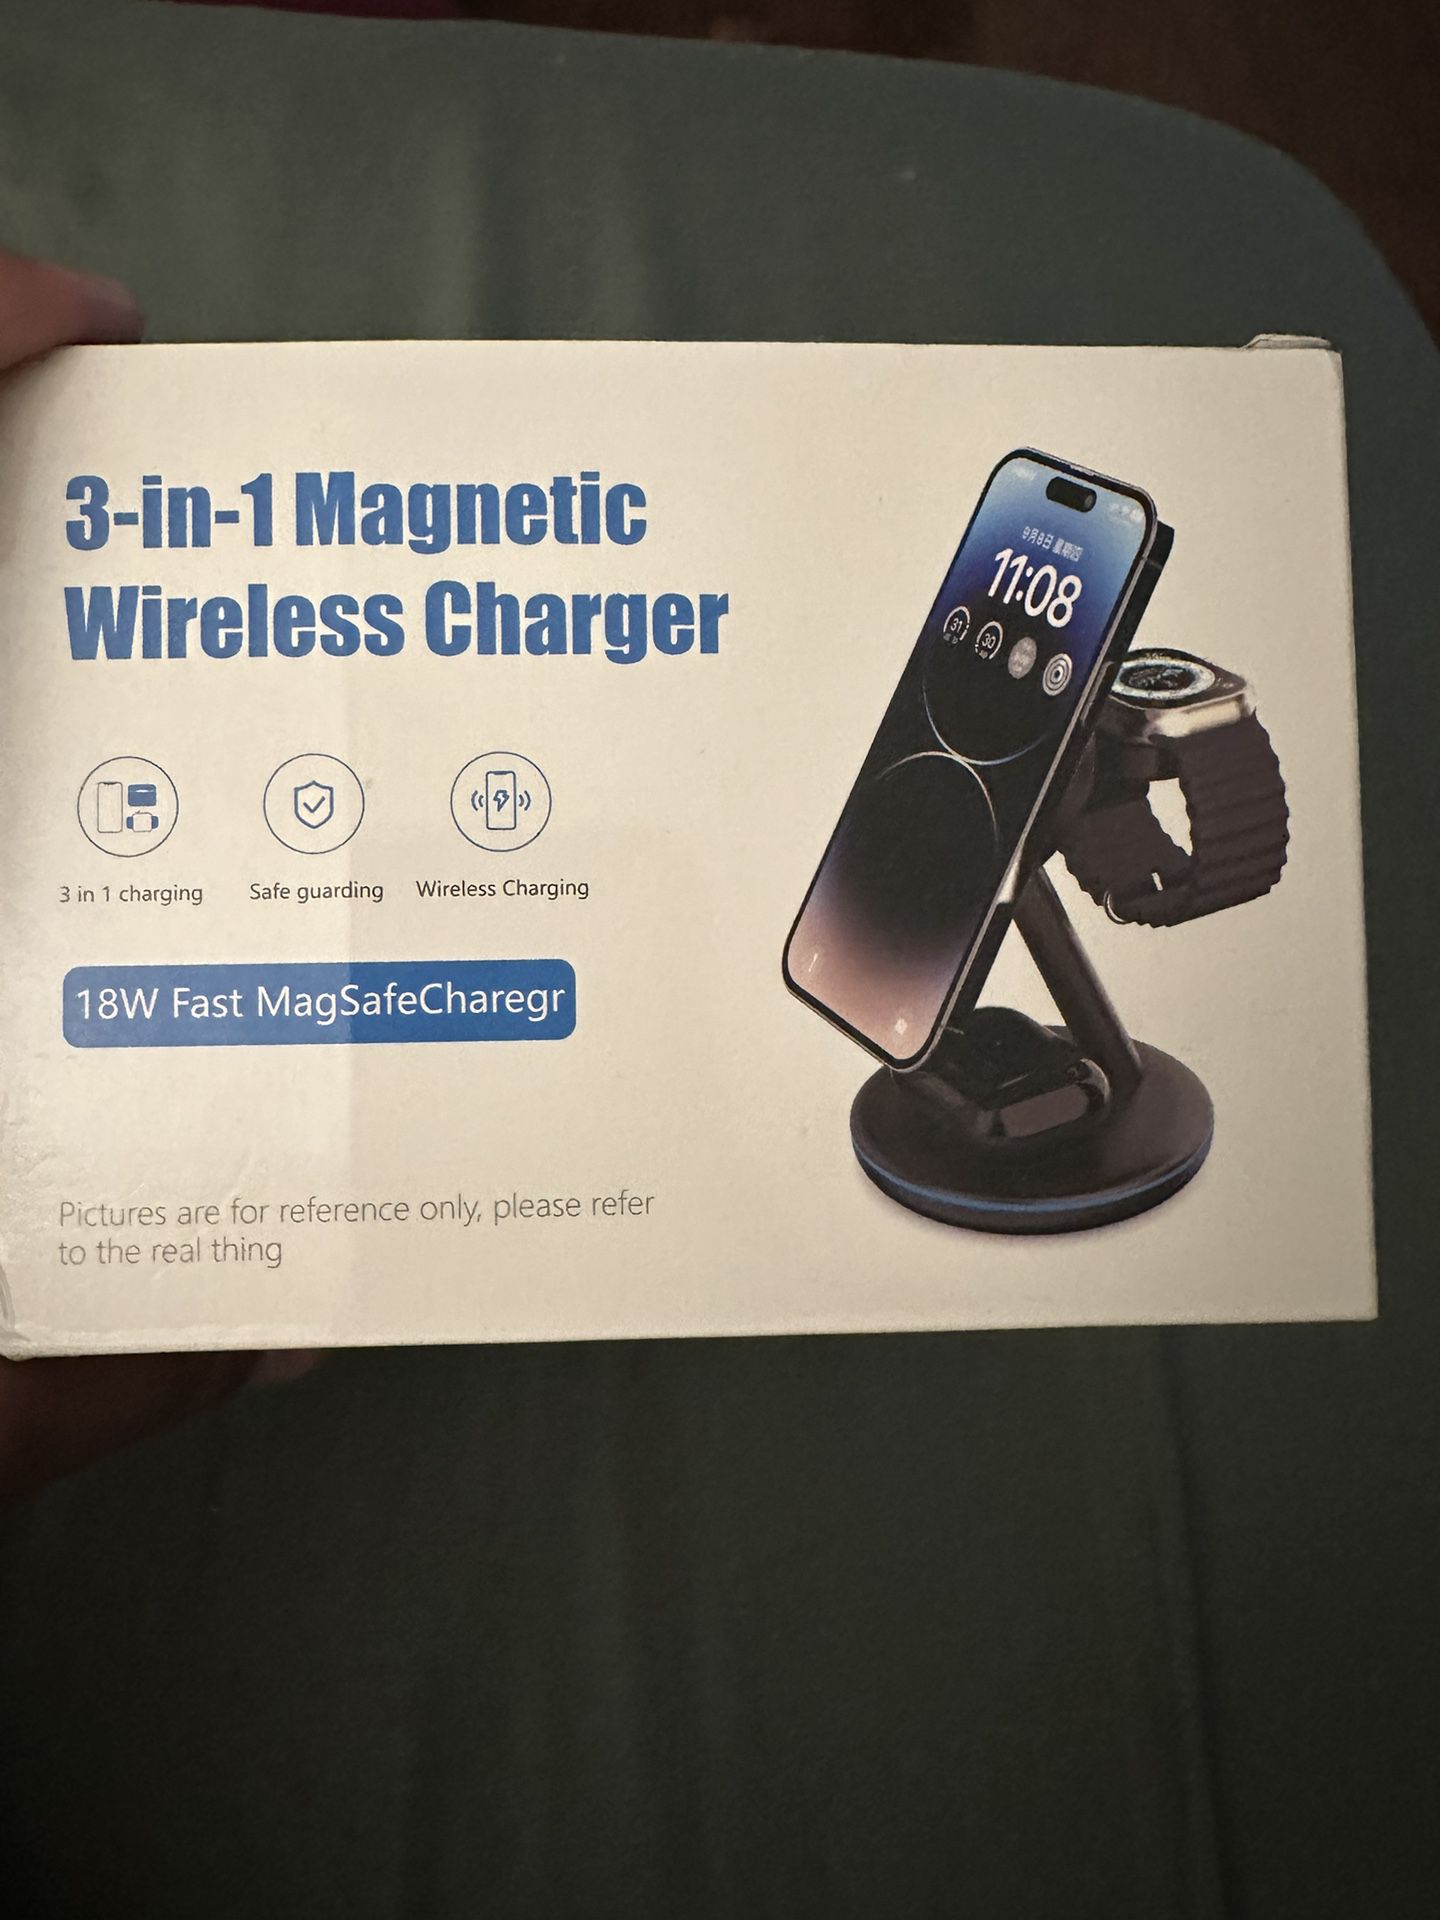 3-in-1 Magnetic Wireless Charger 